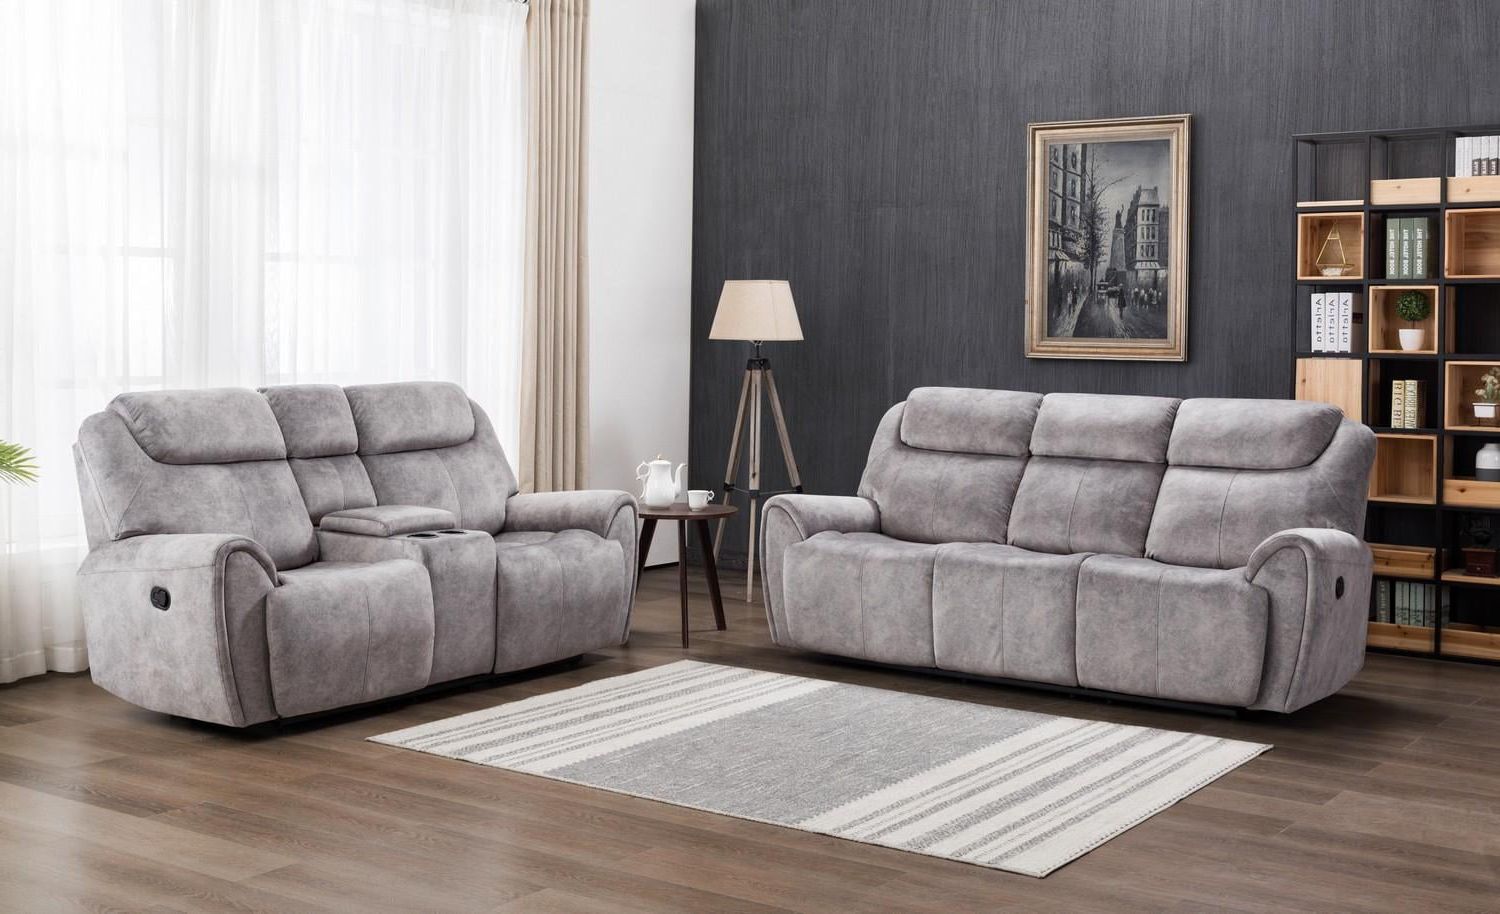 Gray Velvet Fabric Reclining Sofa & Loveseat Set Contemporary Global For Fashionable Modern Velvet Sofa Recliners With Storage (View 8 of 15)